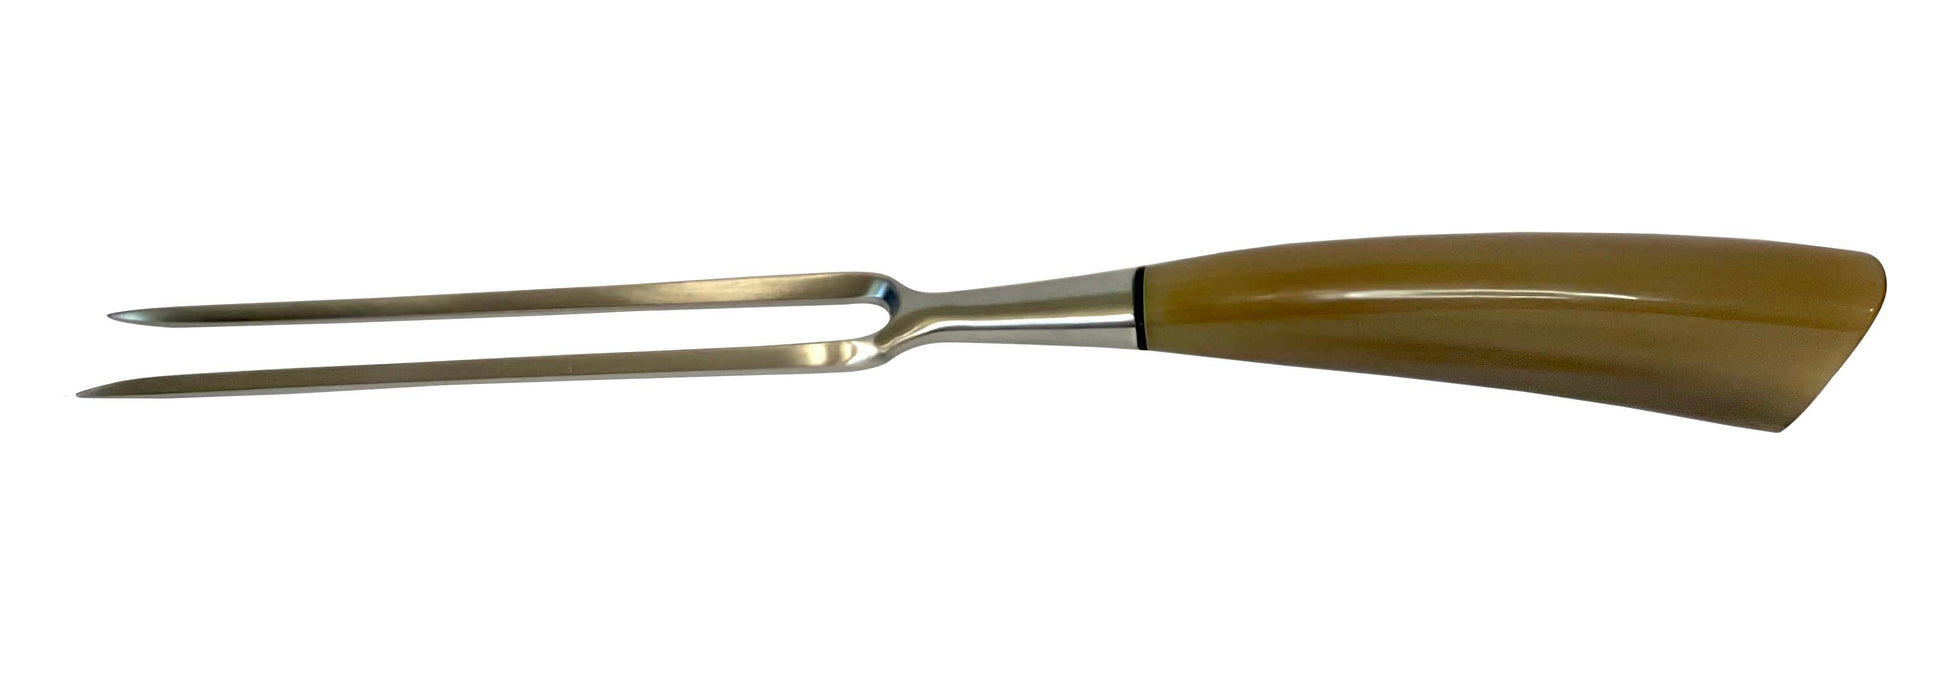 Coltelleria Saladini Stainless Steel Carving Fork with Ox Horn Handle, 5.9-Inch